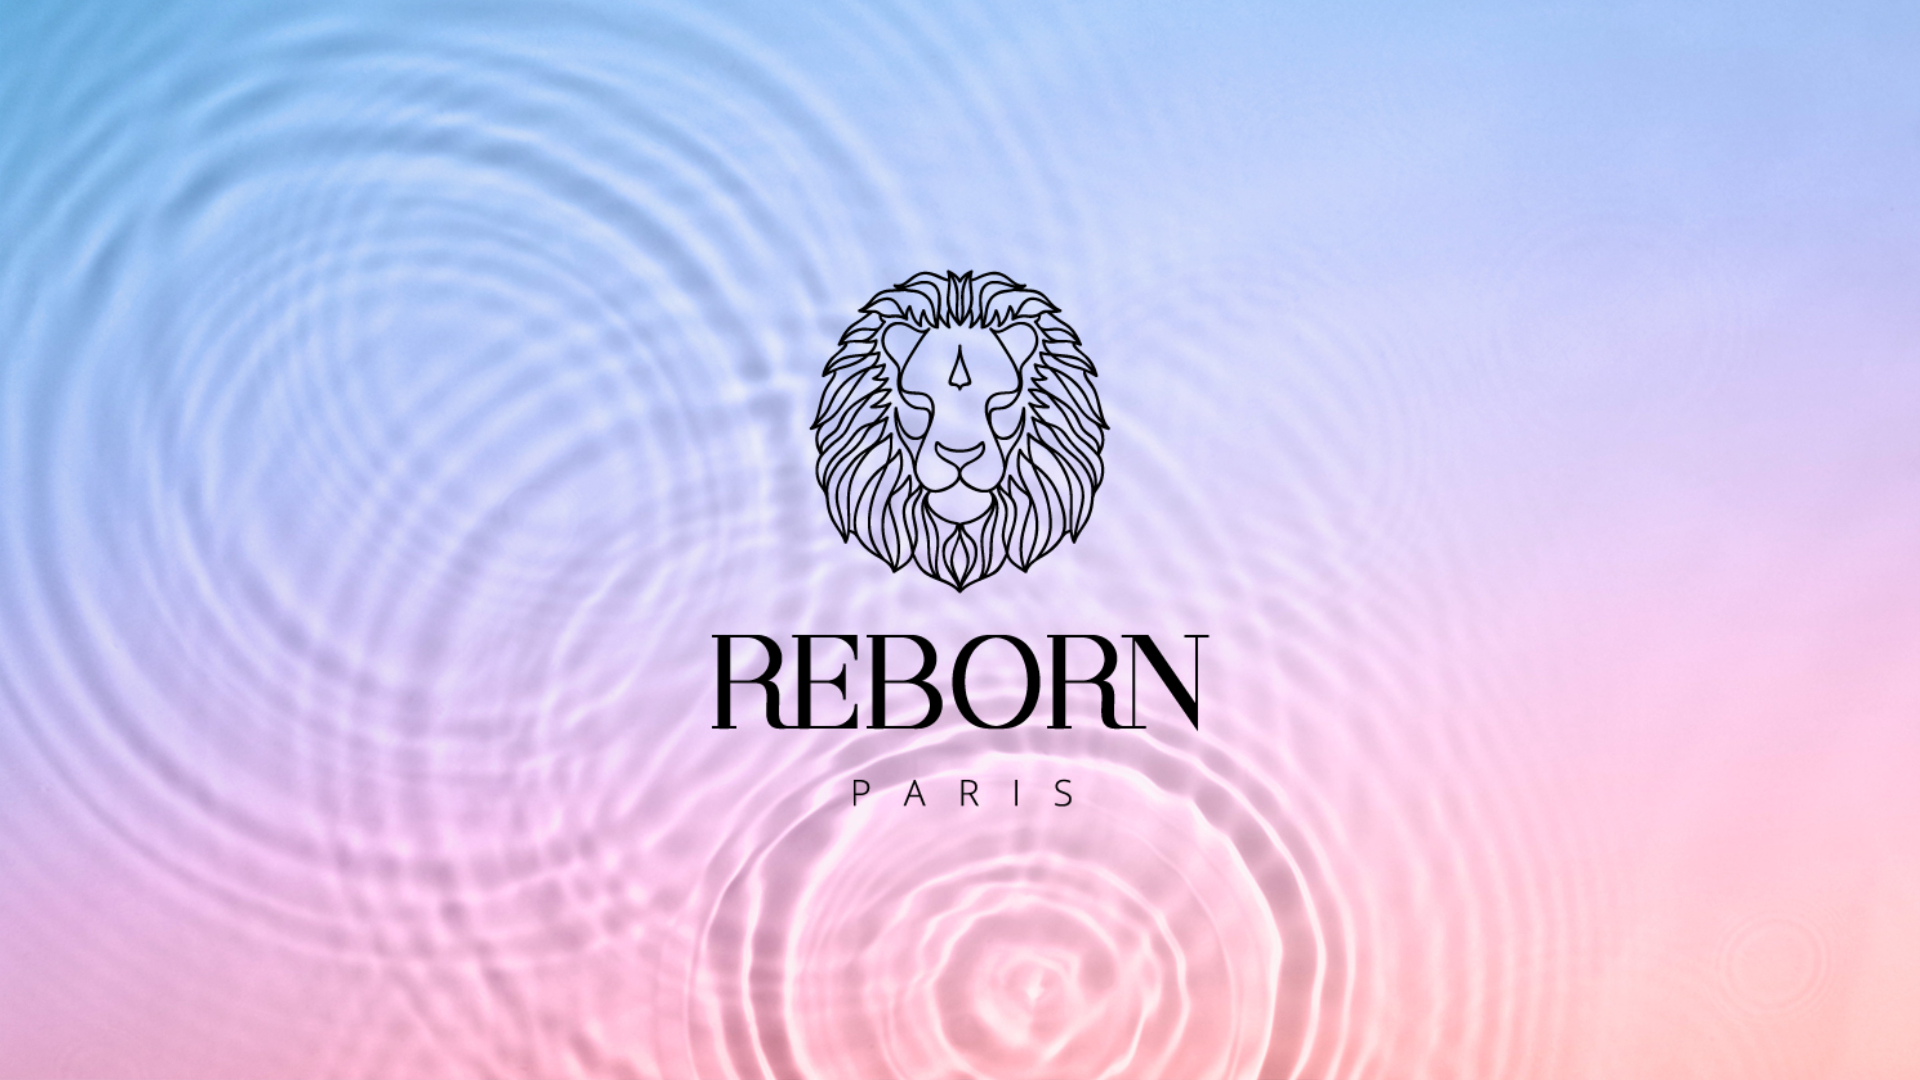 🦁🤫 We tell you the extraordinary story of Reborn Paris!